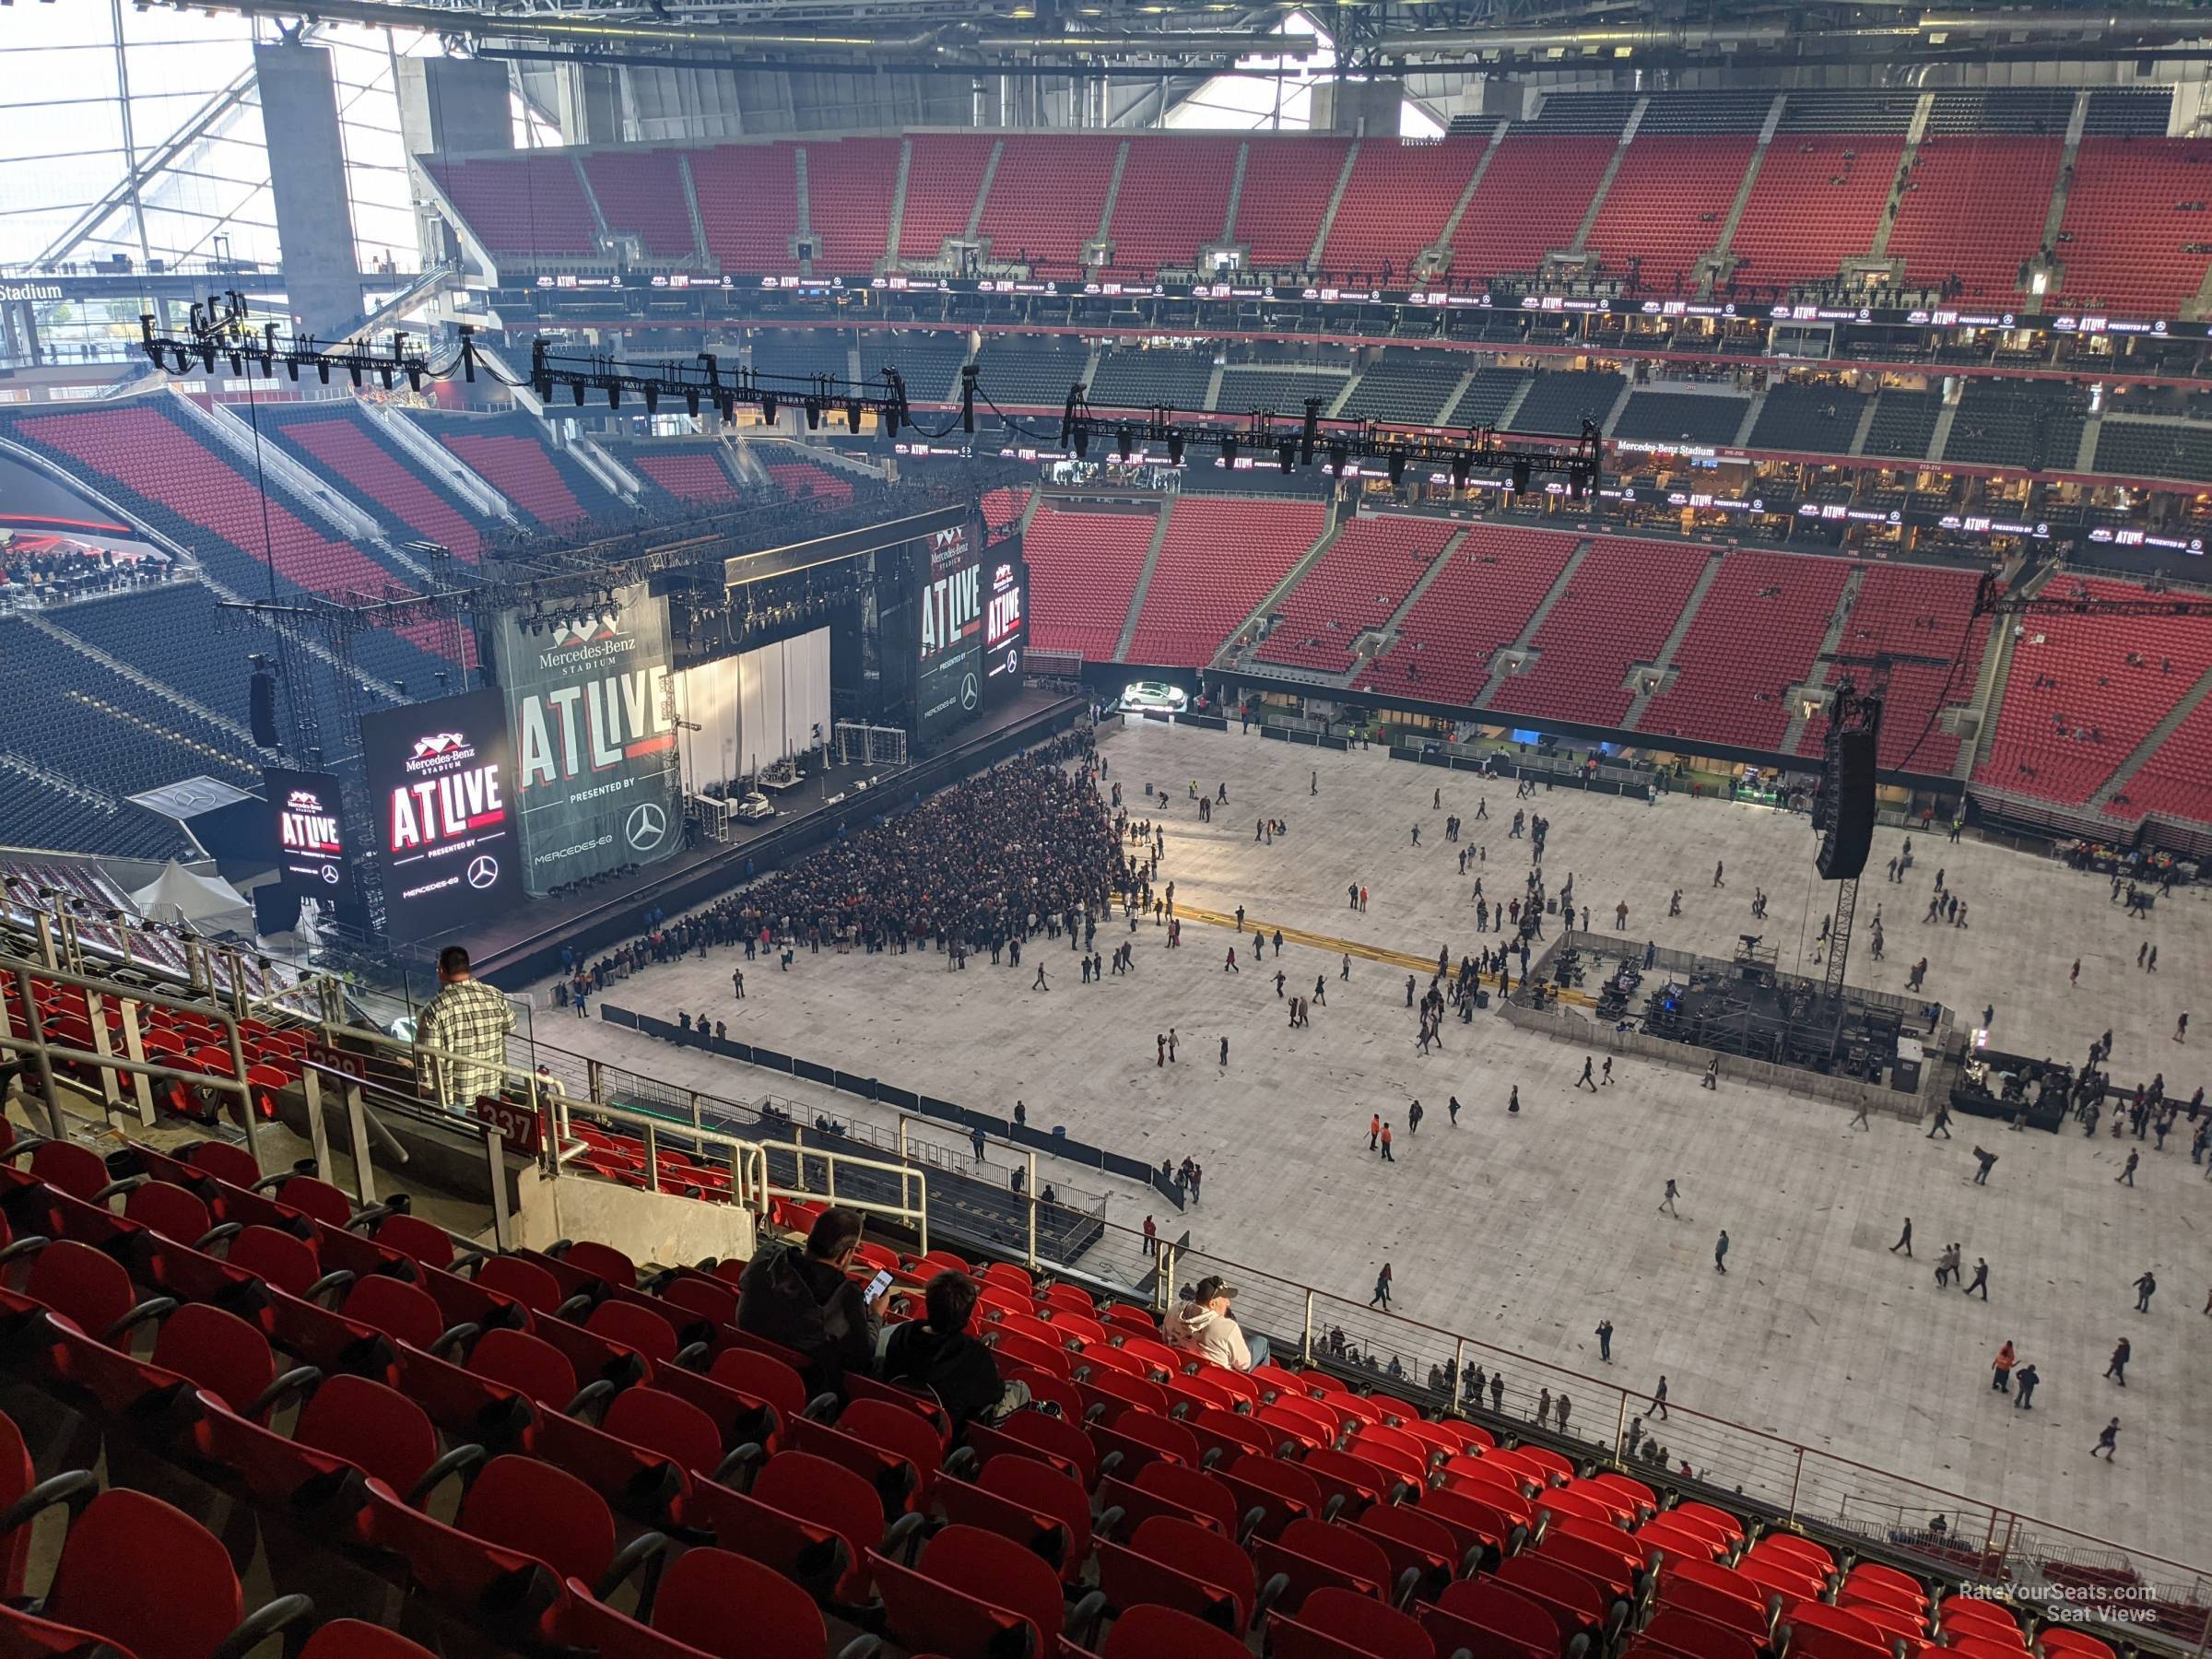 section 337, row 13 seat view  for concert - mercedes-benz stadium